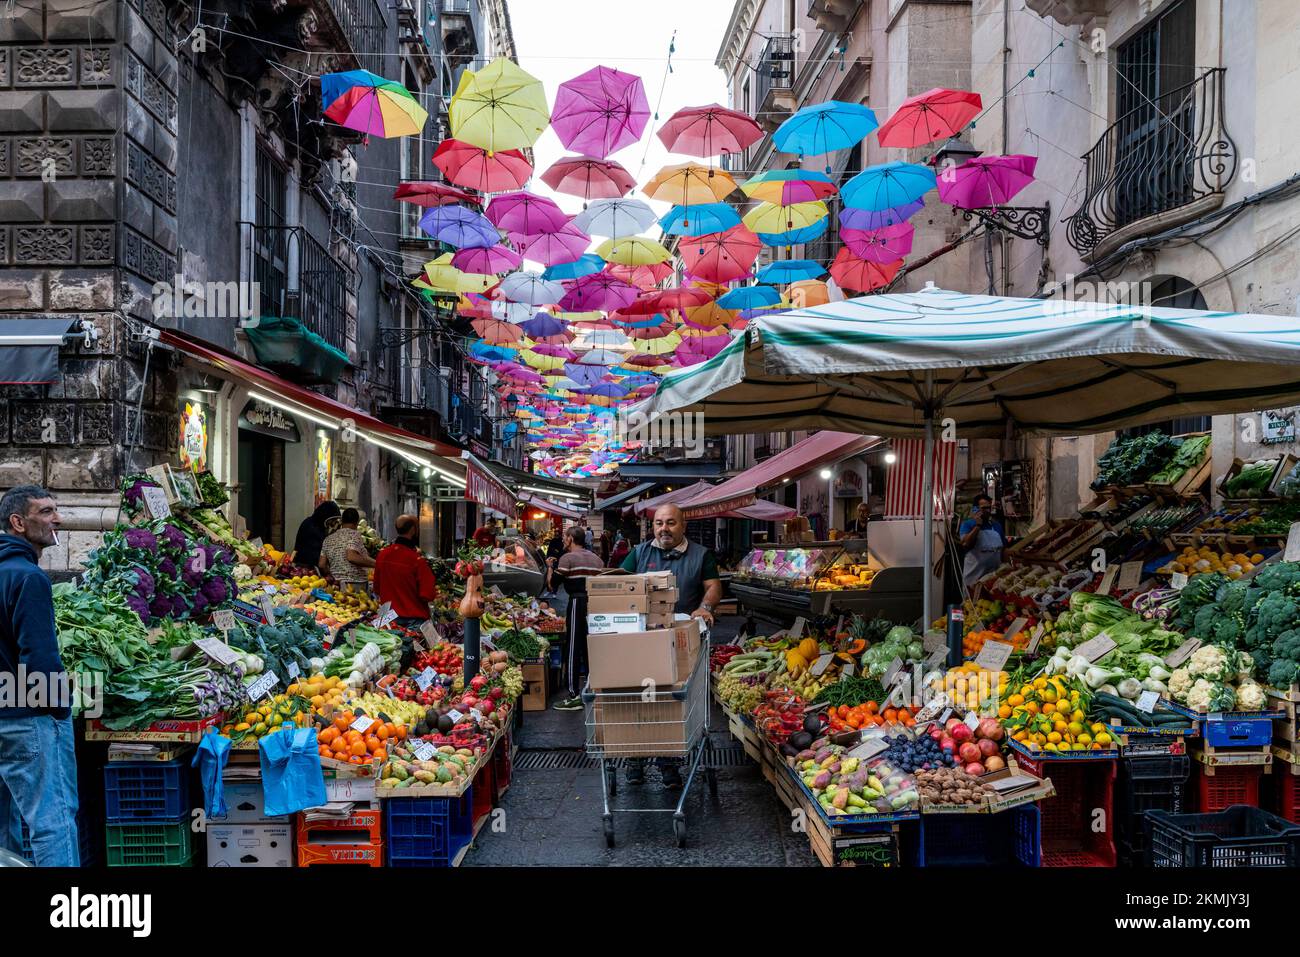 Fruit and Vegetables For Sale At A Colourful Street Market, Catania, Sicily, Italy. Stock Photo